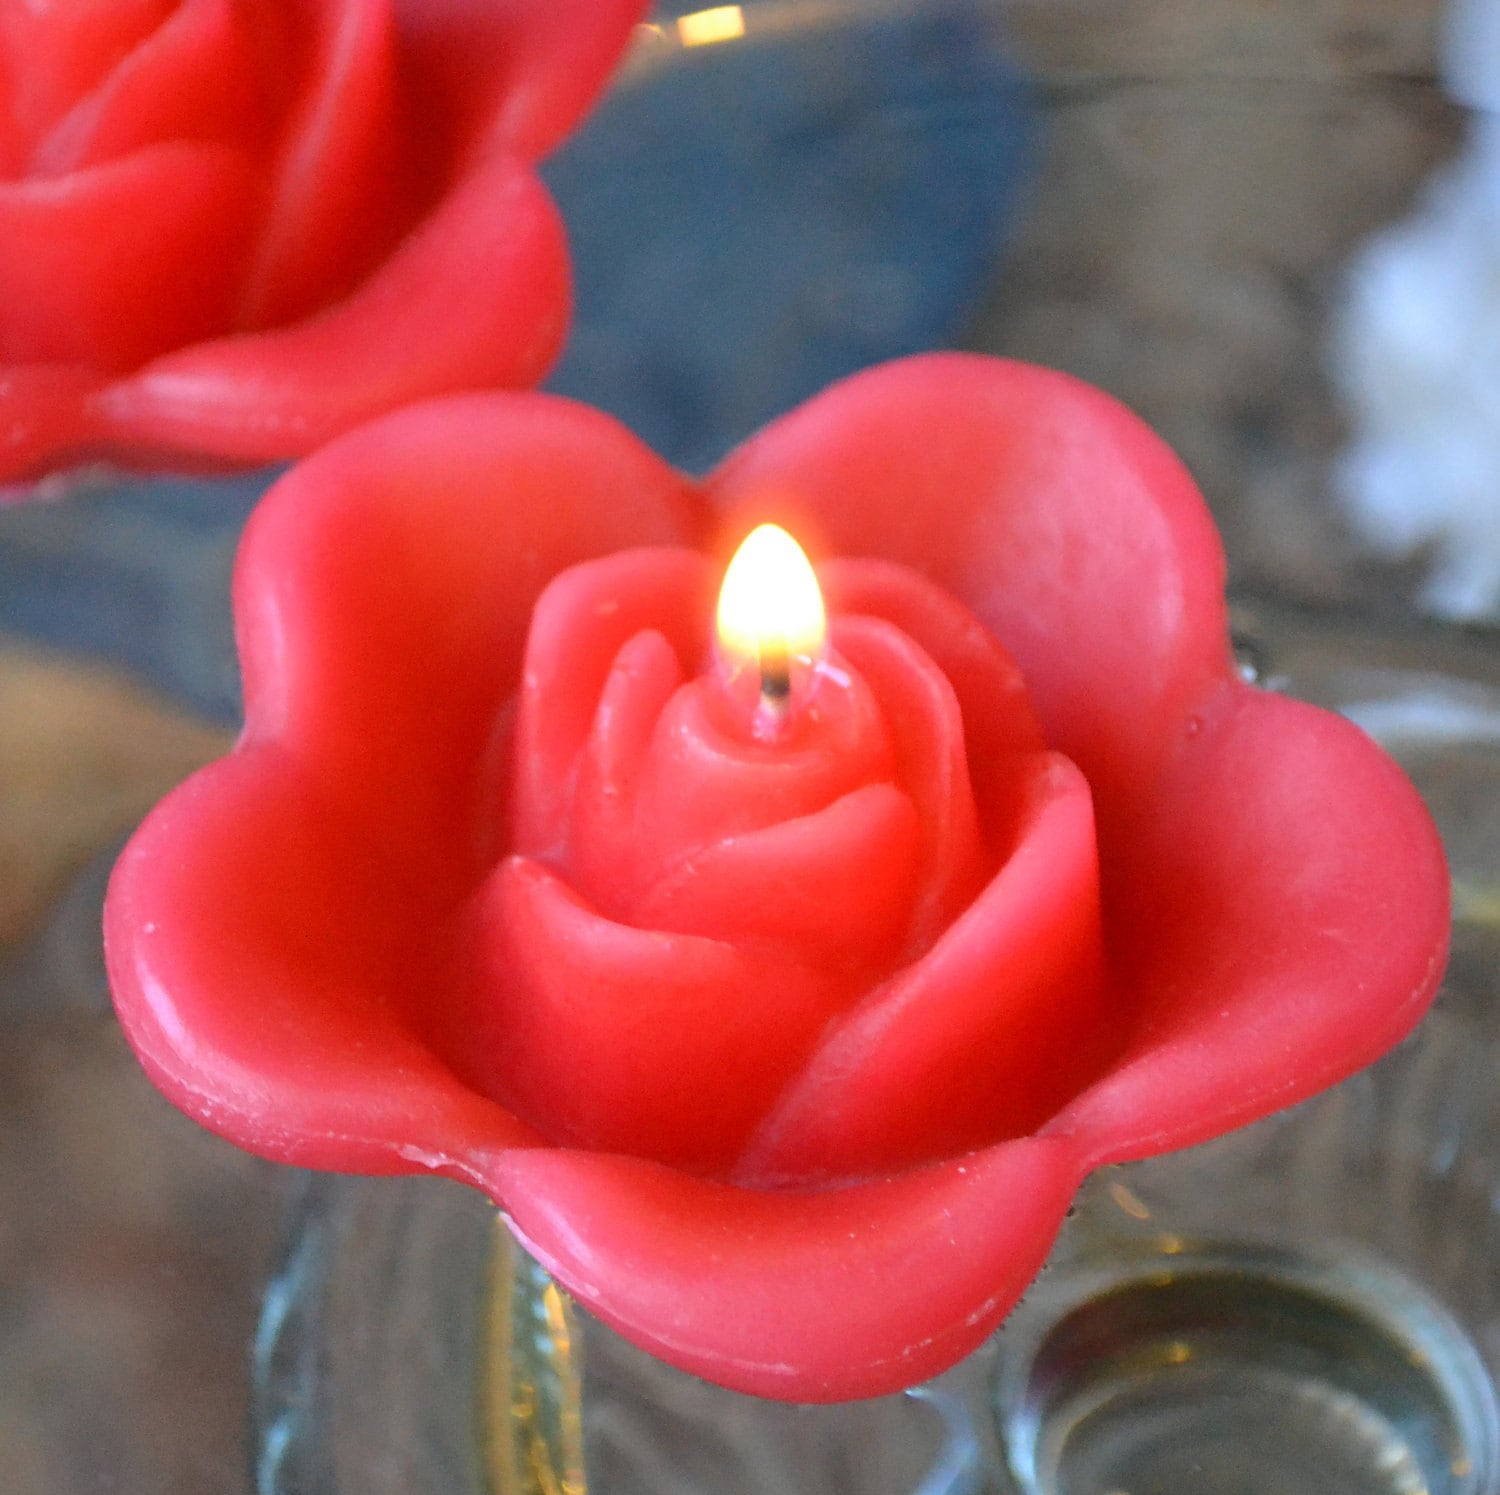 Handmade Aesthetic Candle, Unscented Red Floating Rose Petals Flower Candle,  Wedding Receptions, Baby Showers, Birthdays, Celebrations & More 